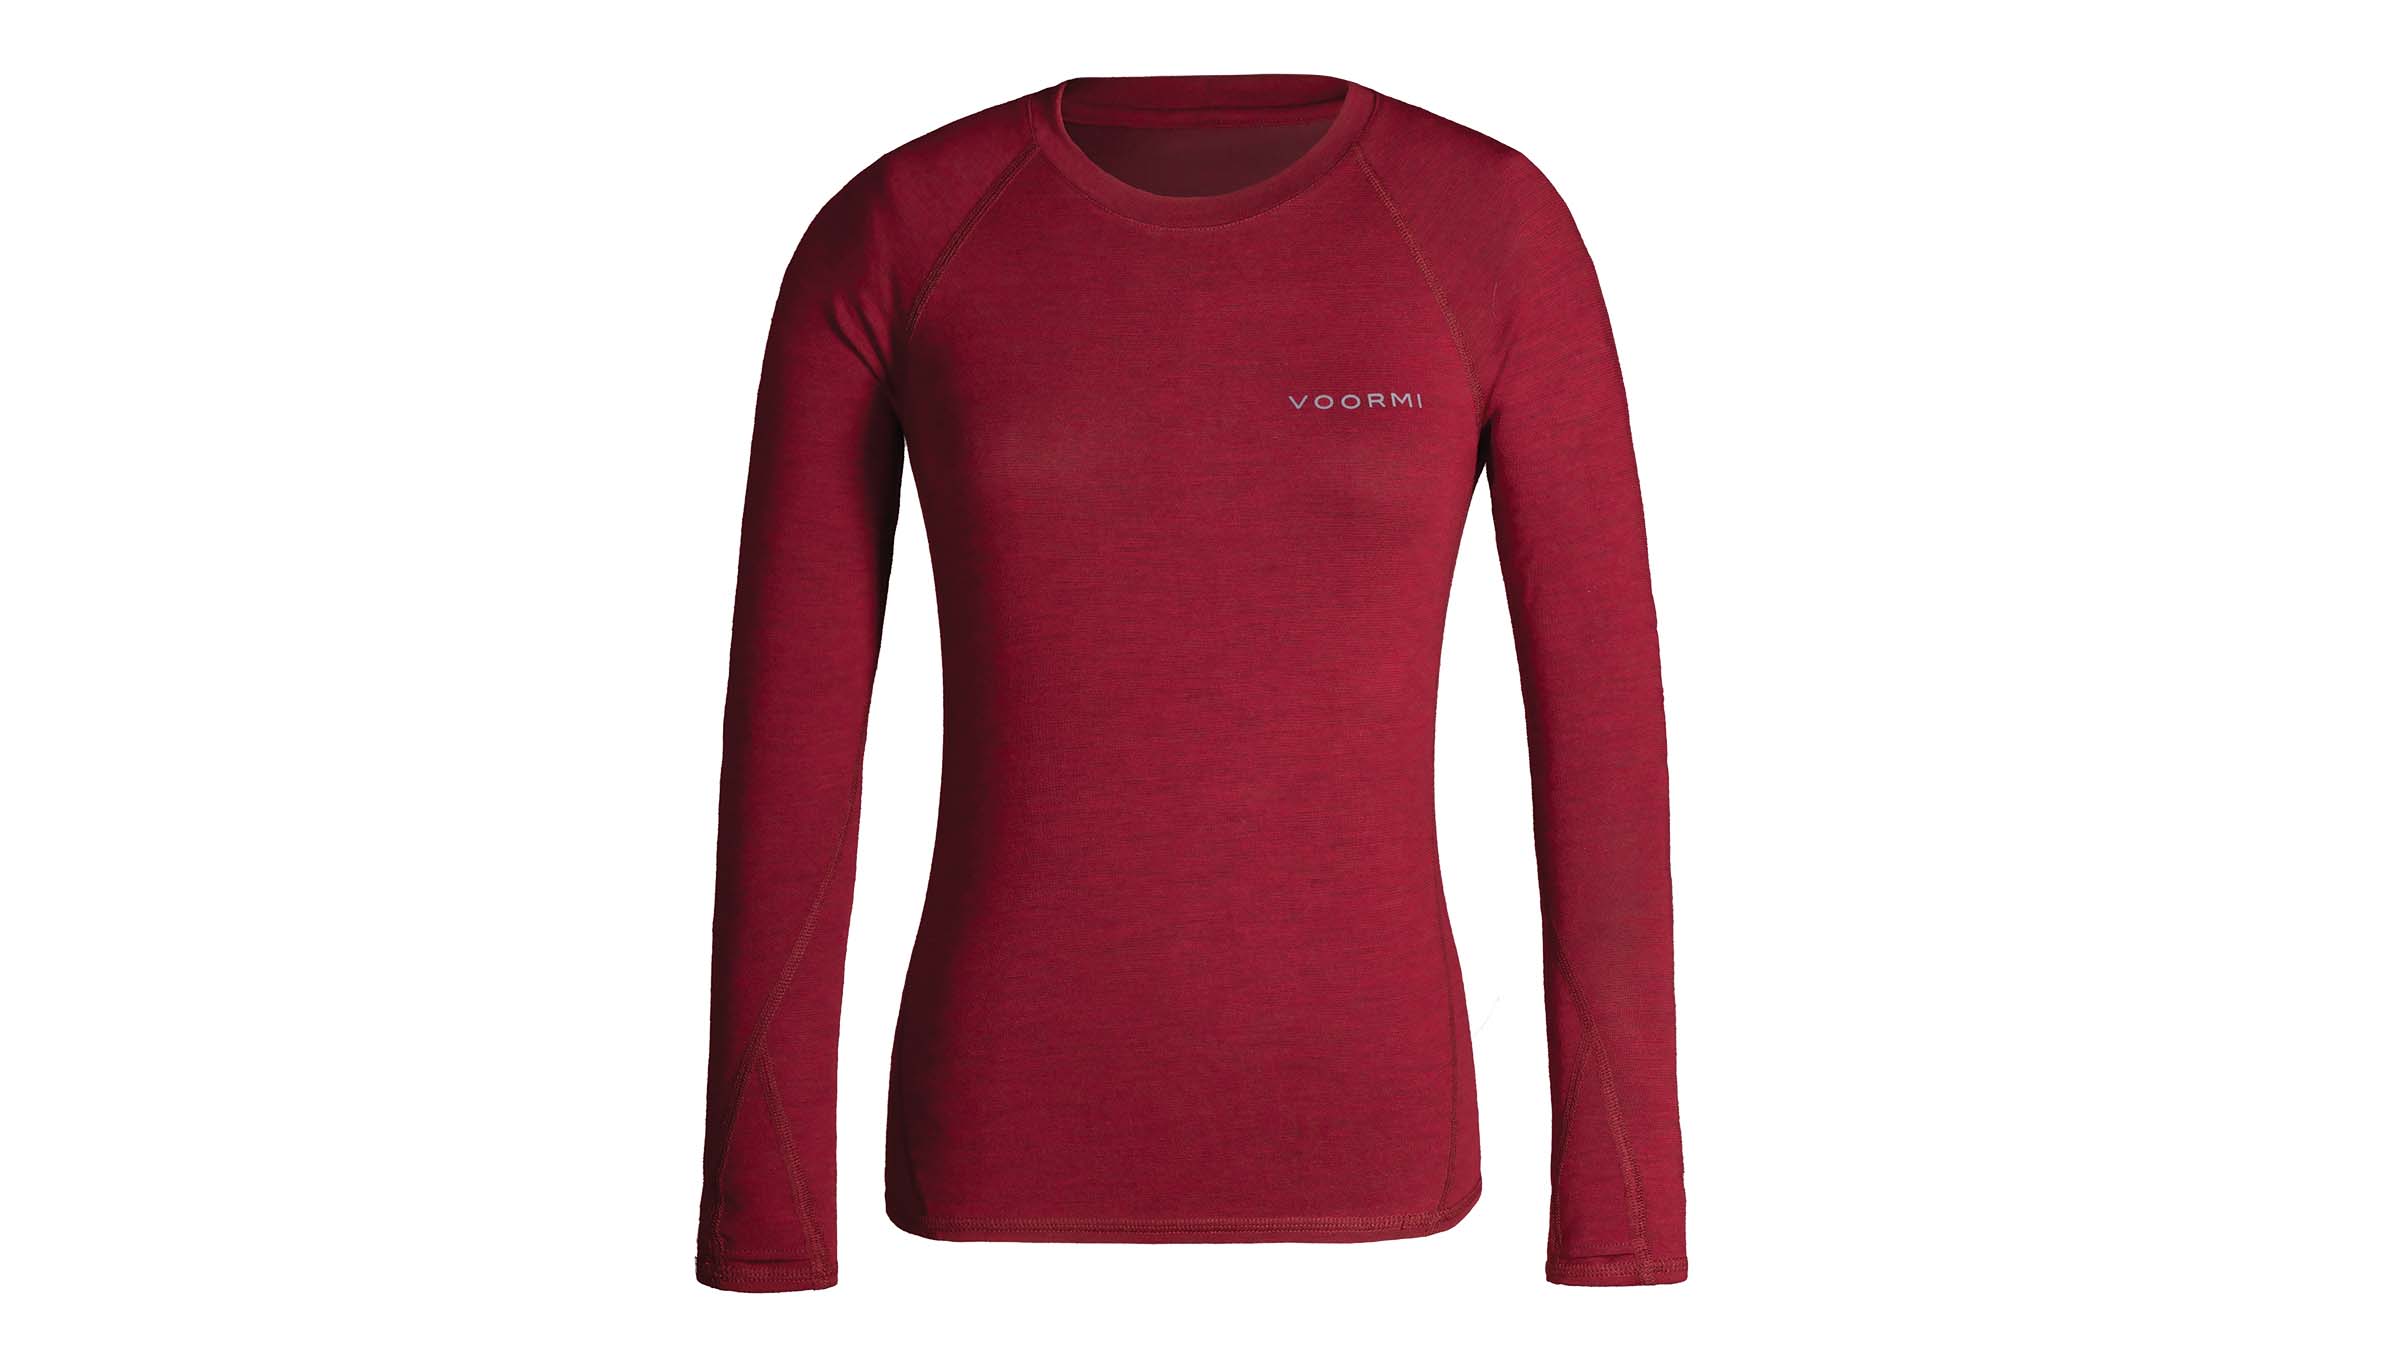 The Merino Wool Base Layer. A system is only as strong as its